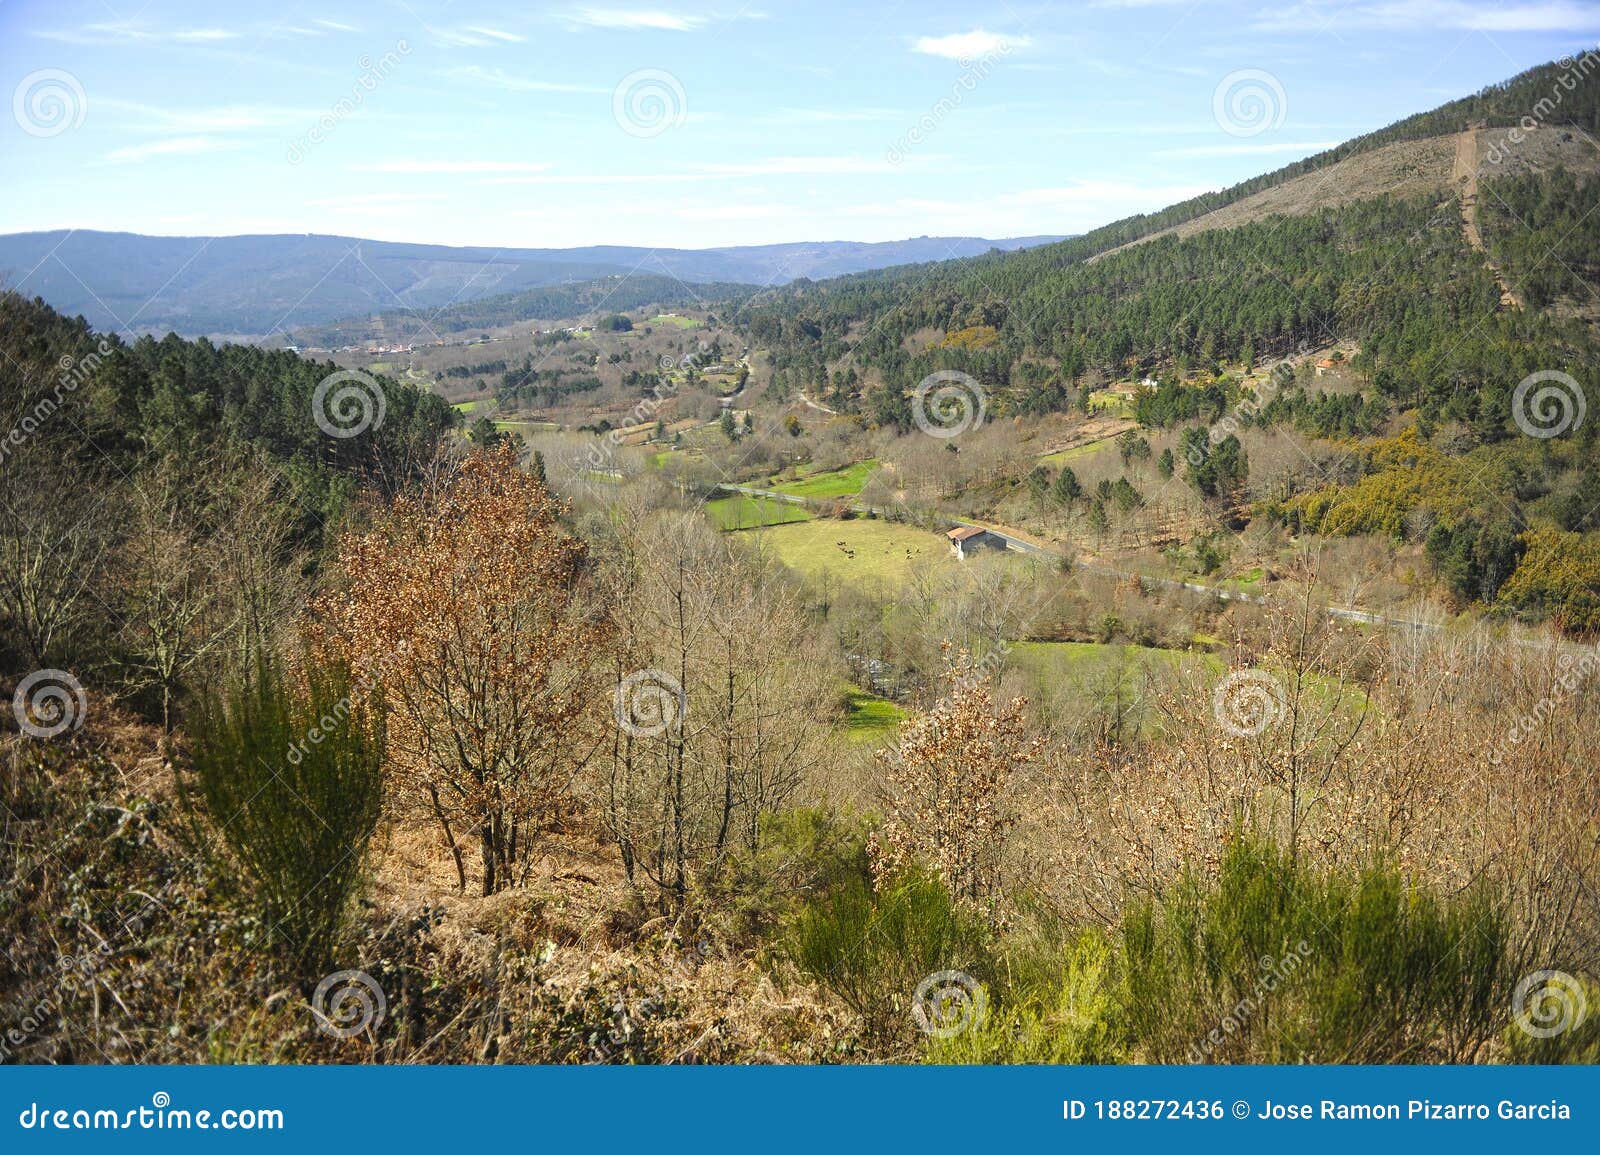 natural landscape of the mountains on the camino de santiago near laza, spain